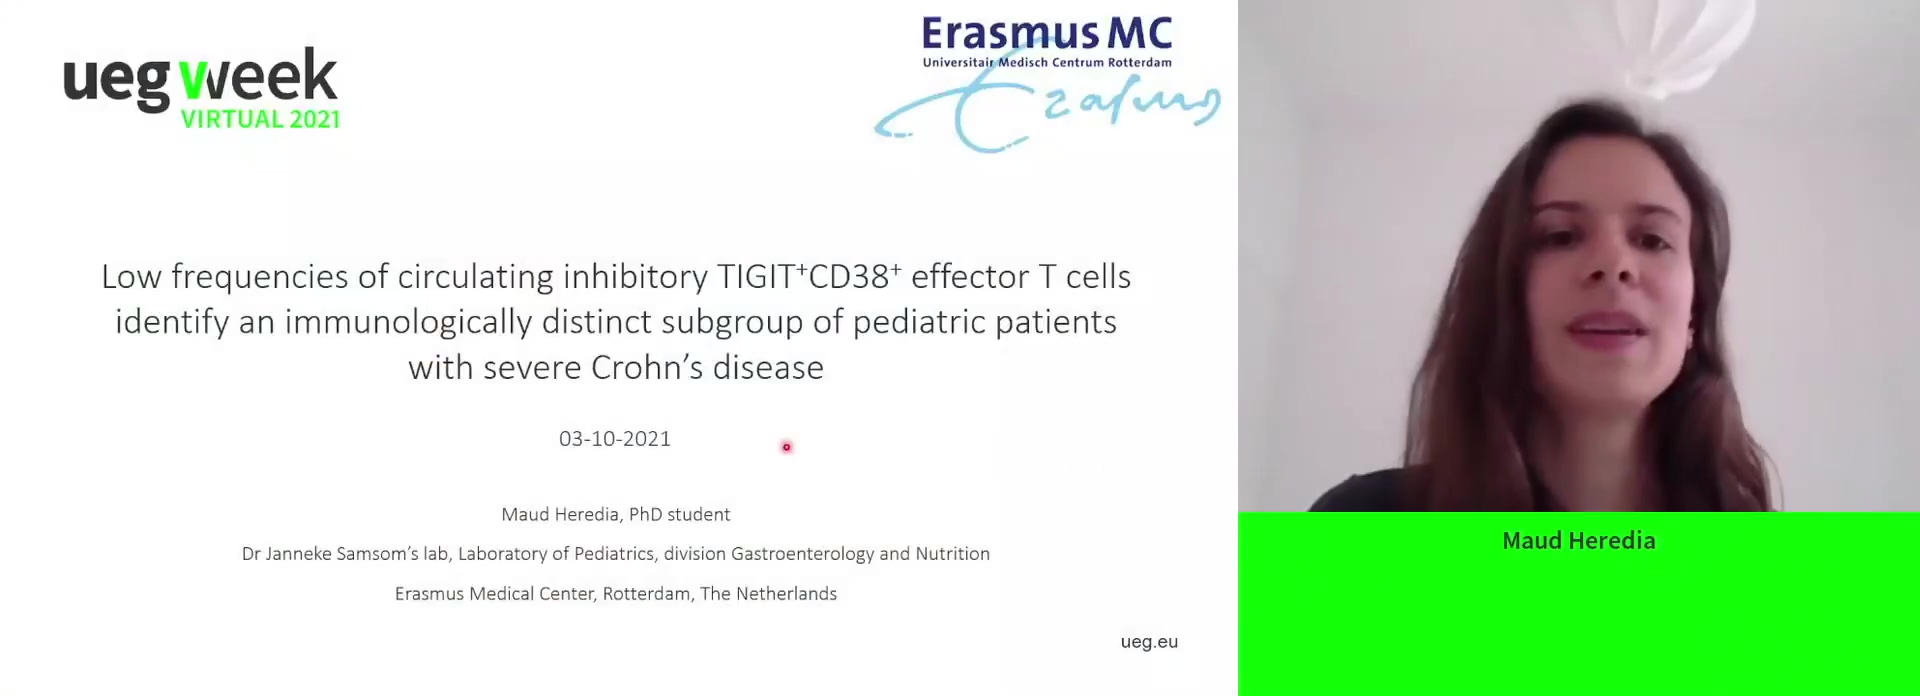 LOW FREQUENCIES OF CIRCULATING INHIBITORY TIGIT+CD38+ EFFECTOR T CELLS IDENTIFY AN IMMUNOLOGICALLY DISTINCT SUBGROUP OF PEDIATRIC PATIENTS WITH SEVERE CROHN’S DISEASE